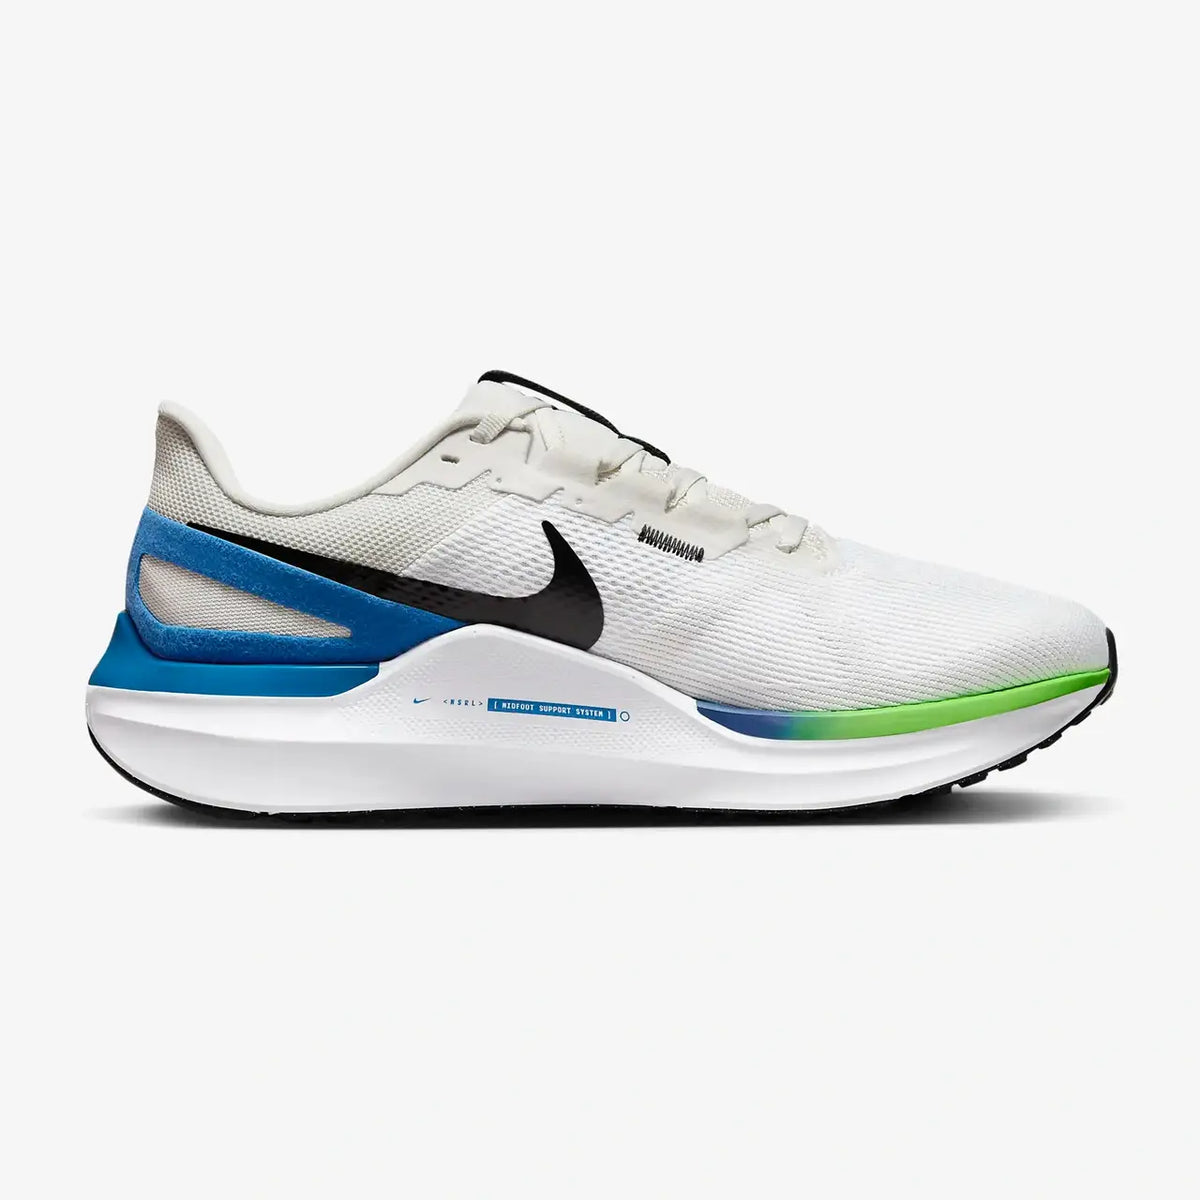 Nike Air Zoom Structure 25 Mens FOOTWEAR - Mens Stability WHITE/BLACK-PLATINUM TINT